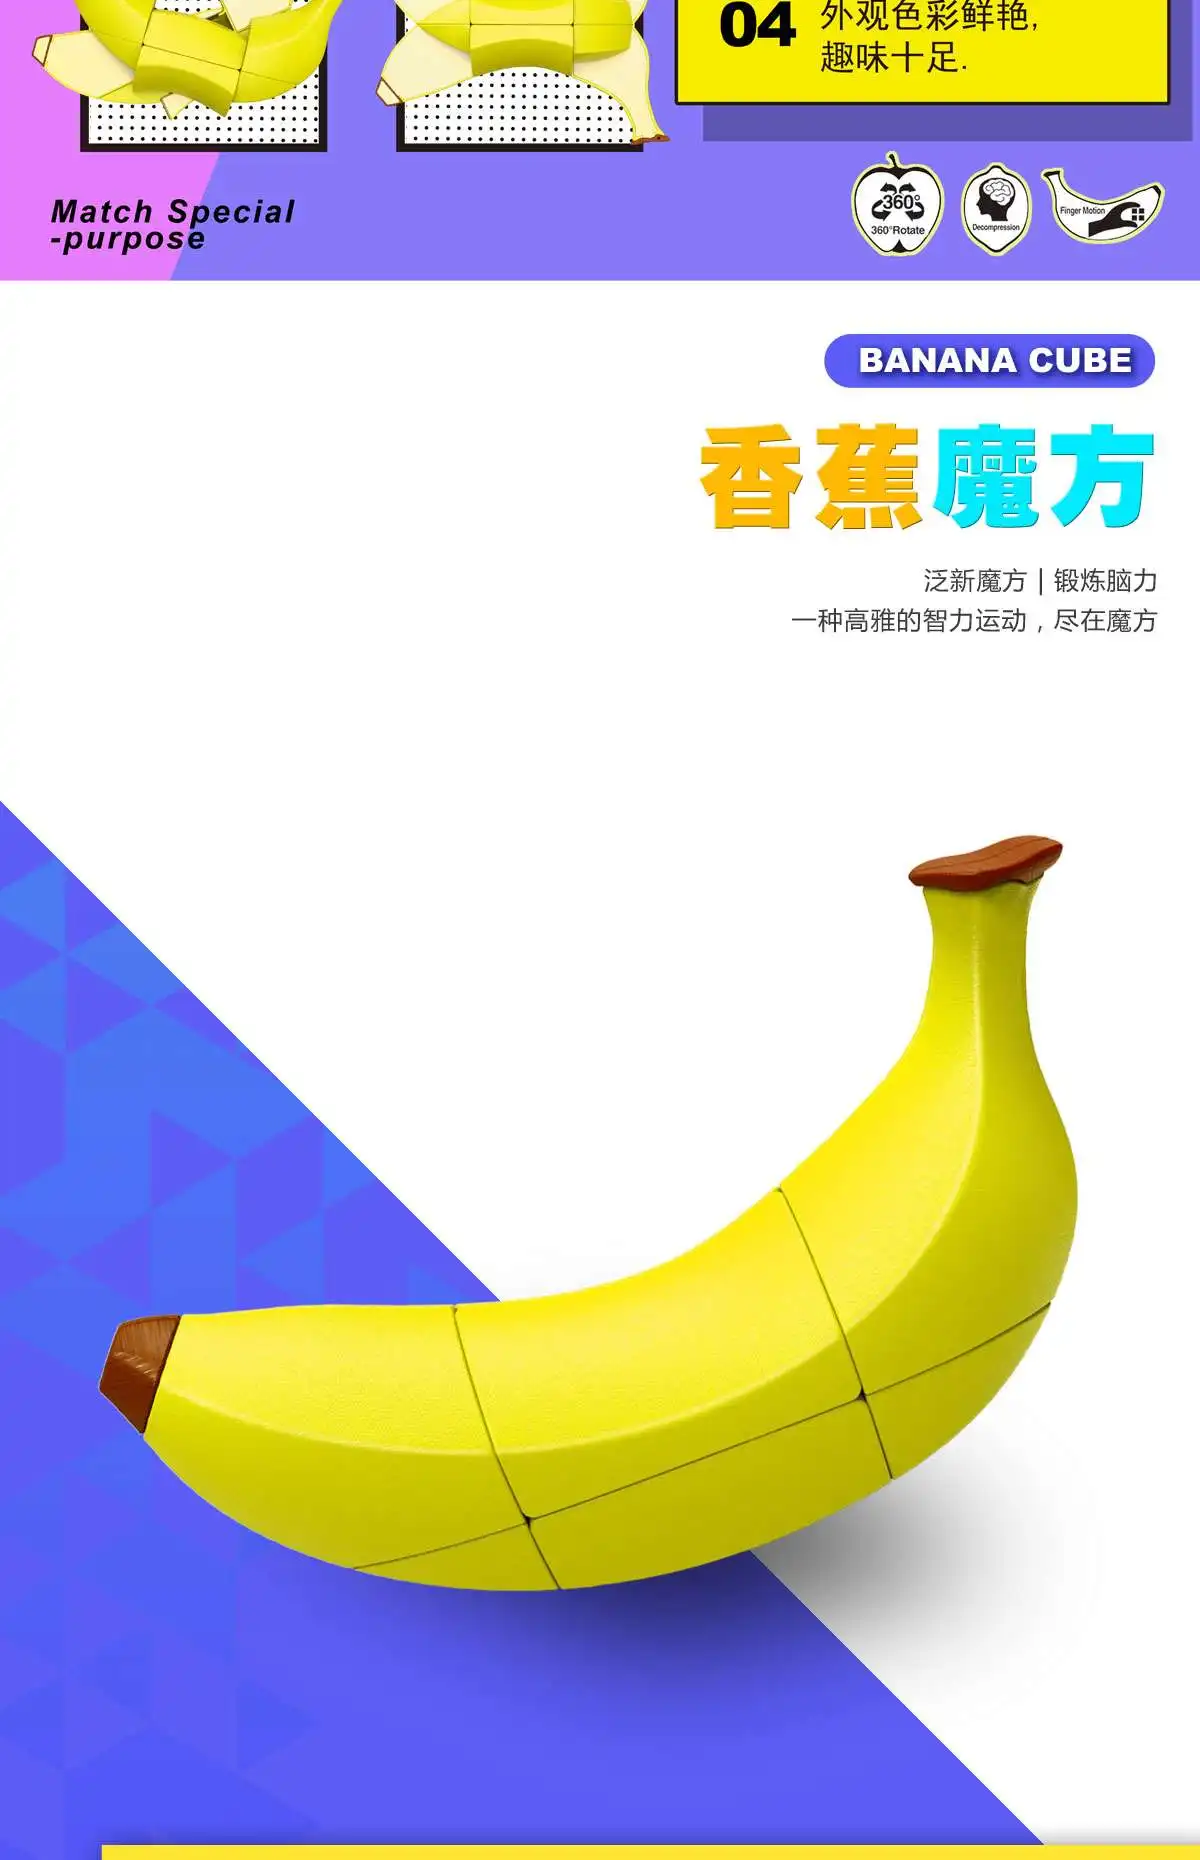 FanXin Fruit Apple/Banana/Lemon Magic Cube Professional Speed Puzzle Twisty Antistress Educational Toys For Children Gift